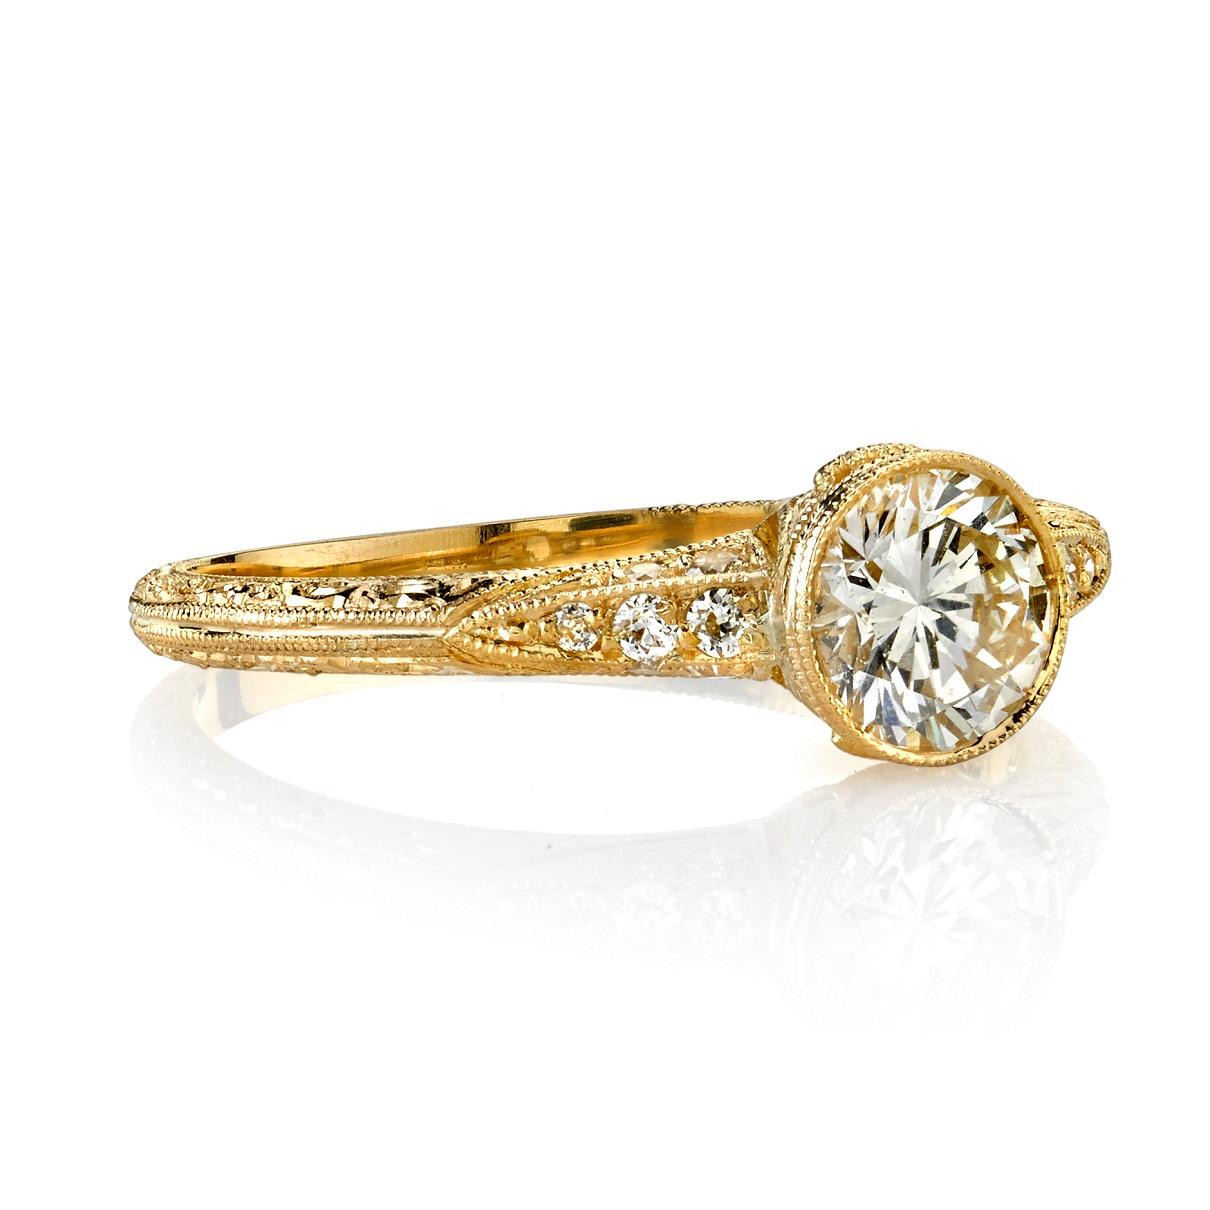 0.64ct G/SI1 EGL certified transitional cut diamond with 0.12ctw old European cut accent diamonds set in a handcrafted 18K yellow gold mounting.

Our jewelry is made locally in Los Angeles and most pieces are made to order. For these made-to-order